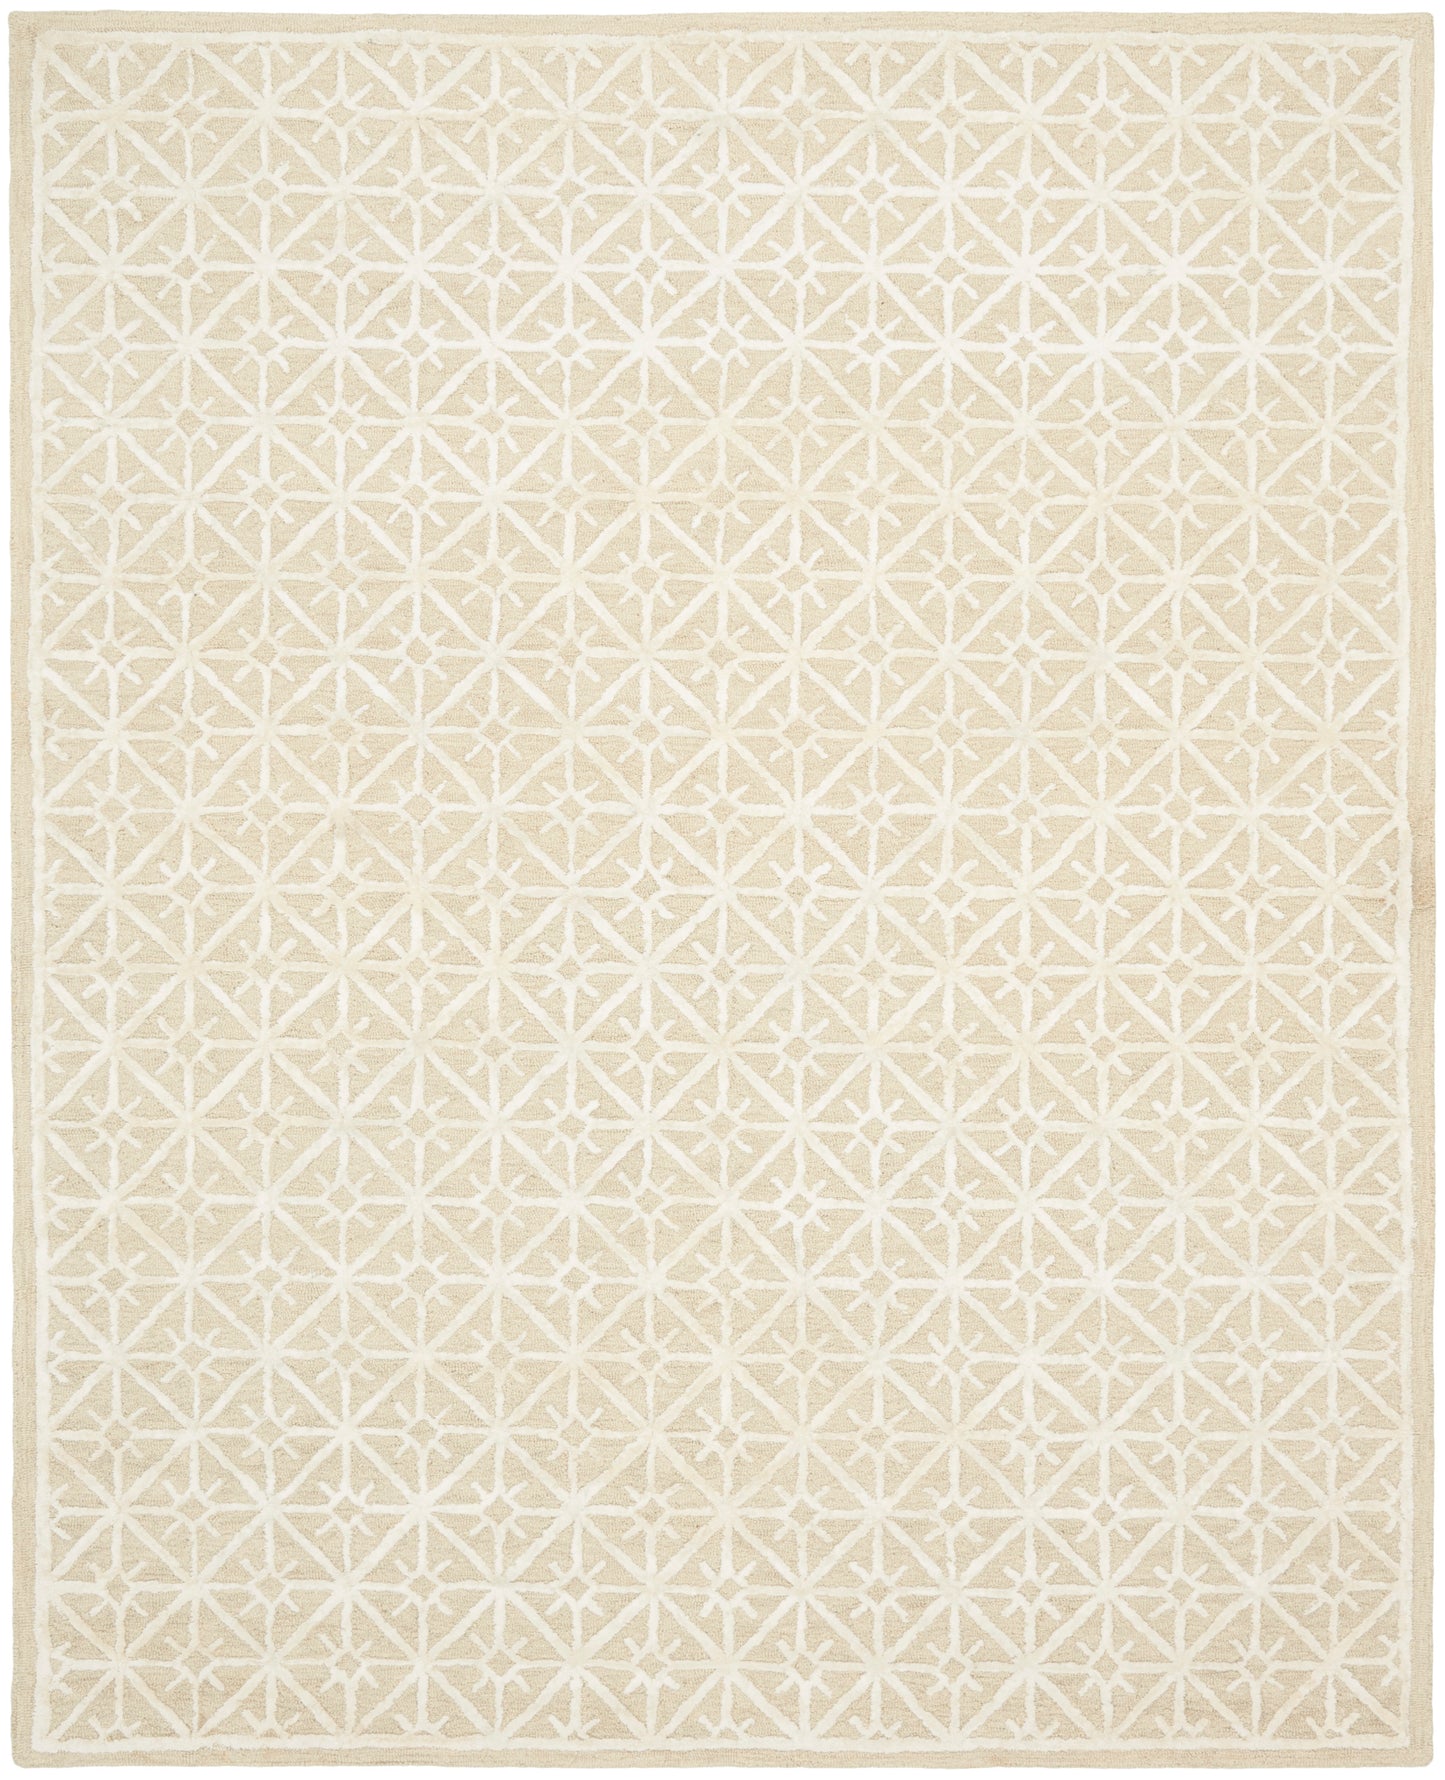 Nicole Curtis Series 2 SR201 Ivory  Contemporary Tufted Rug